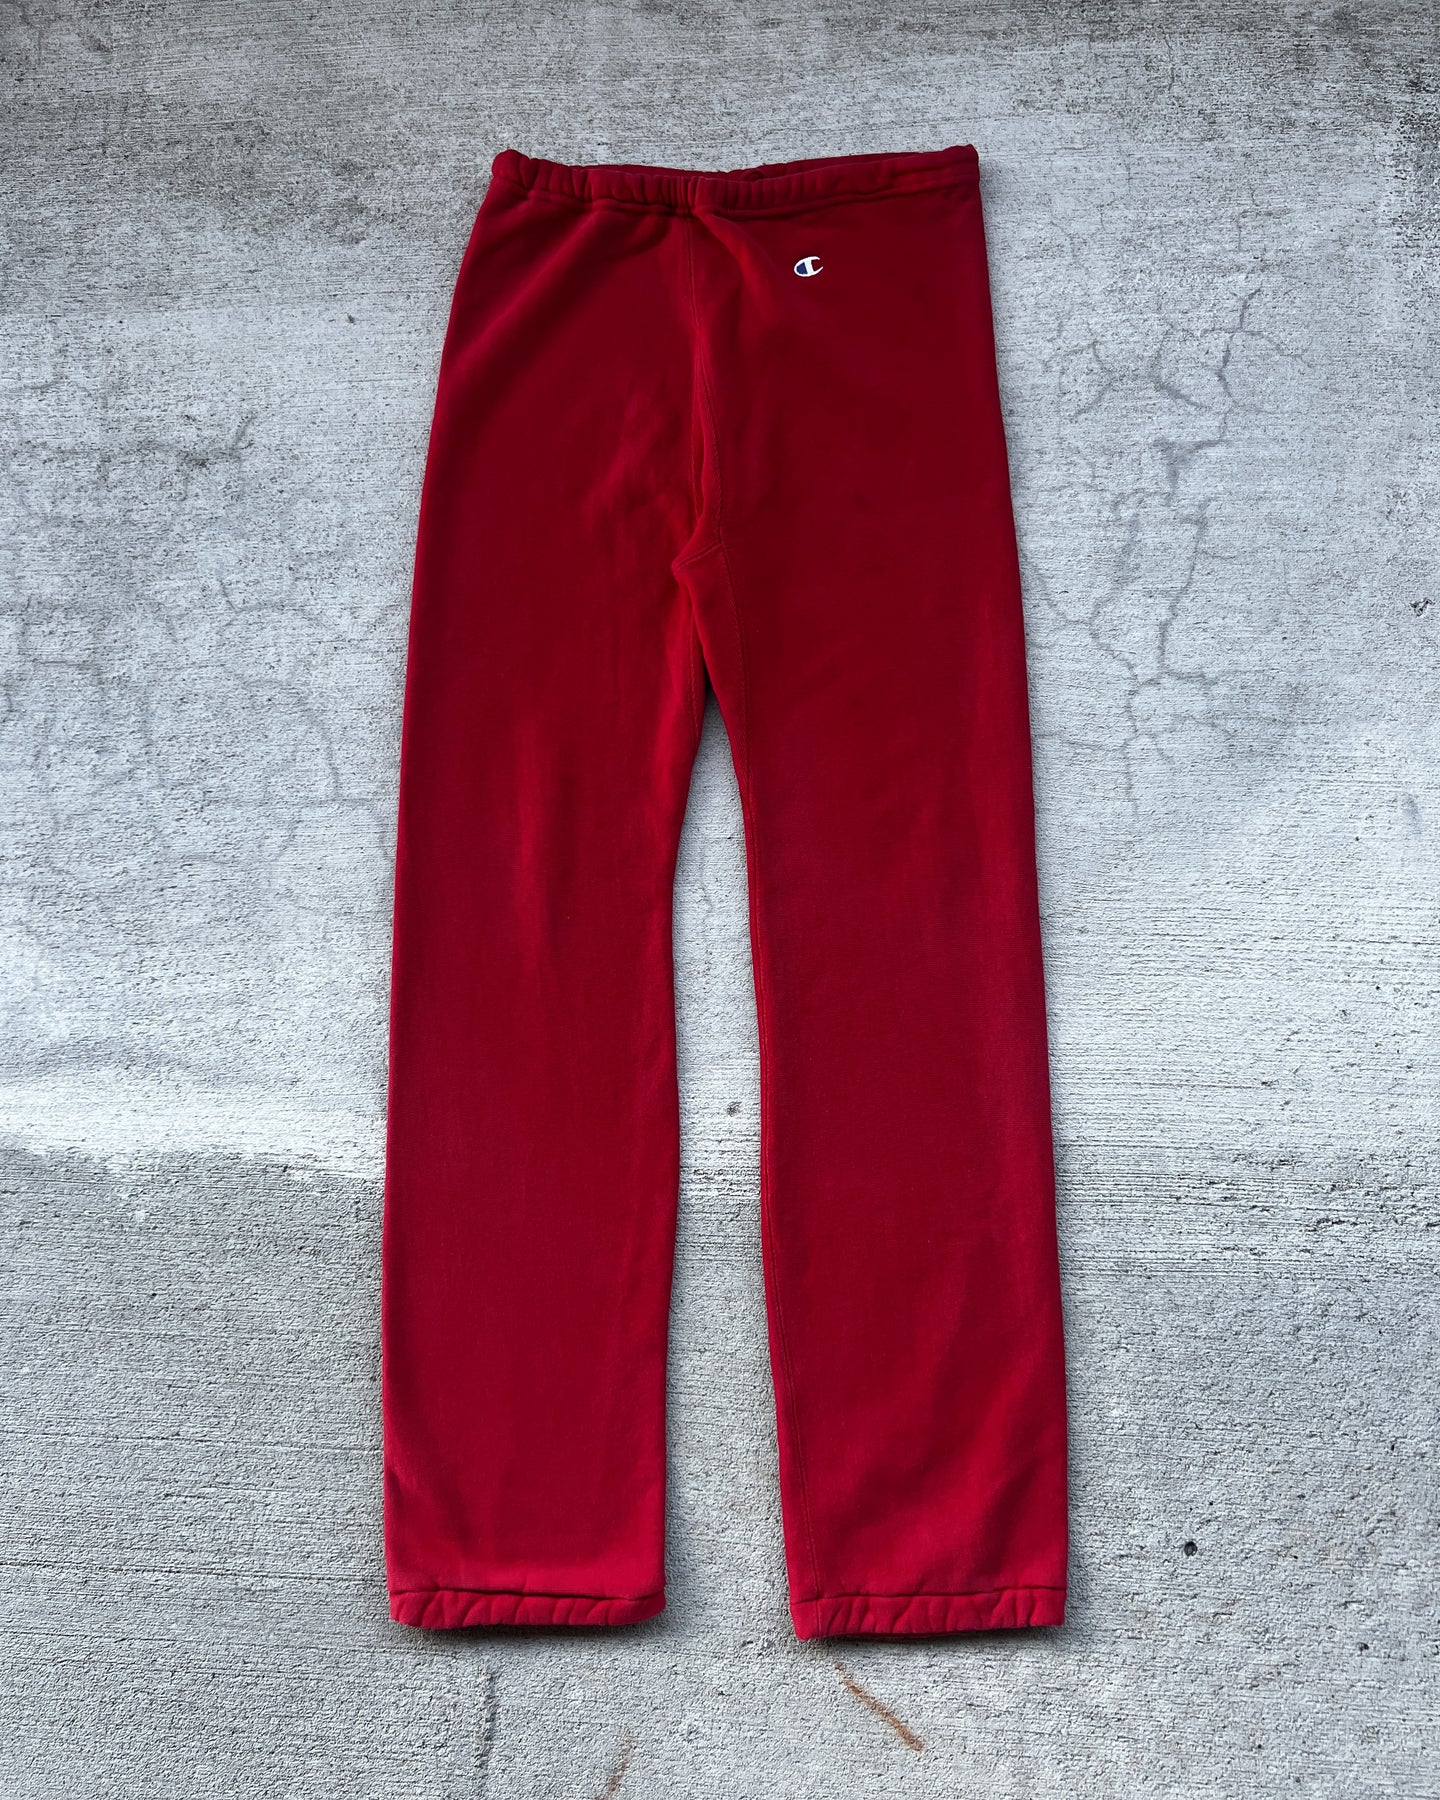 1980s Champion Reverse Weave Red Sweatpants - Size 30 x 31